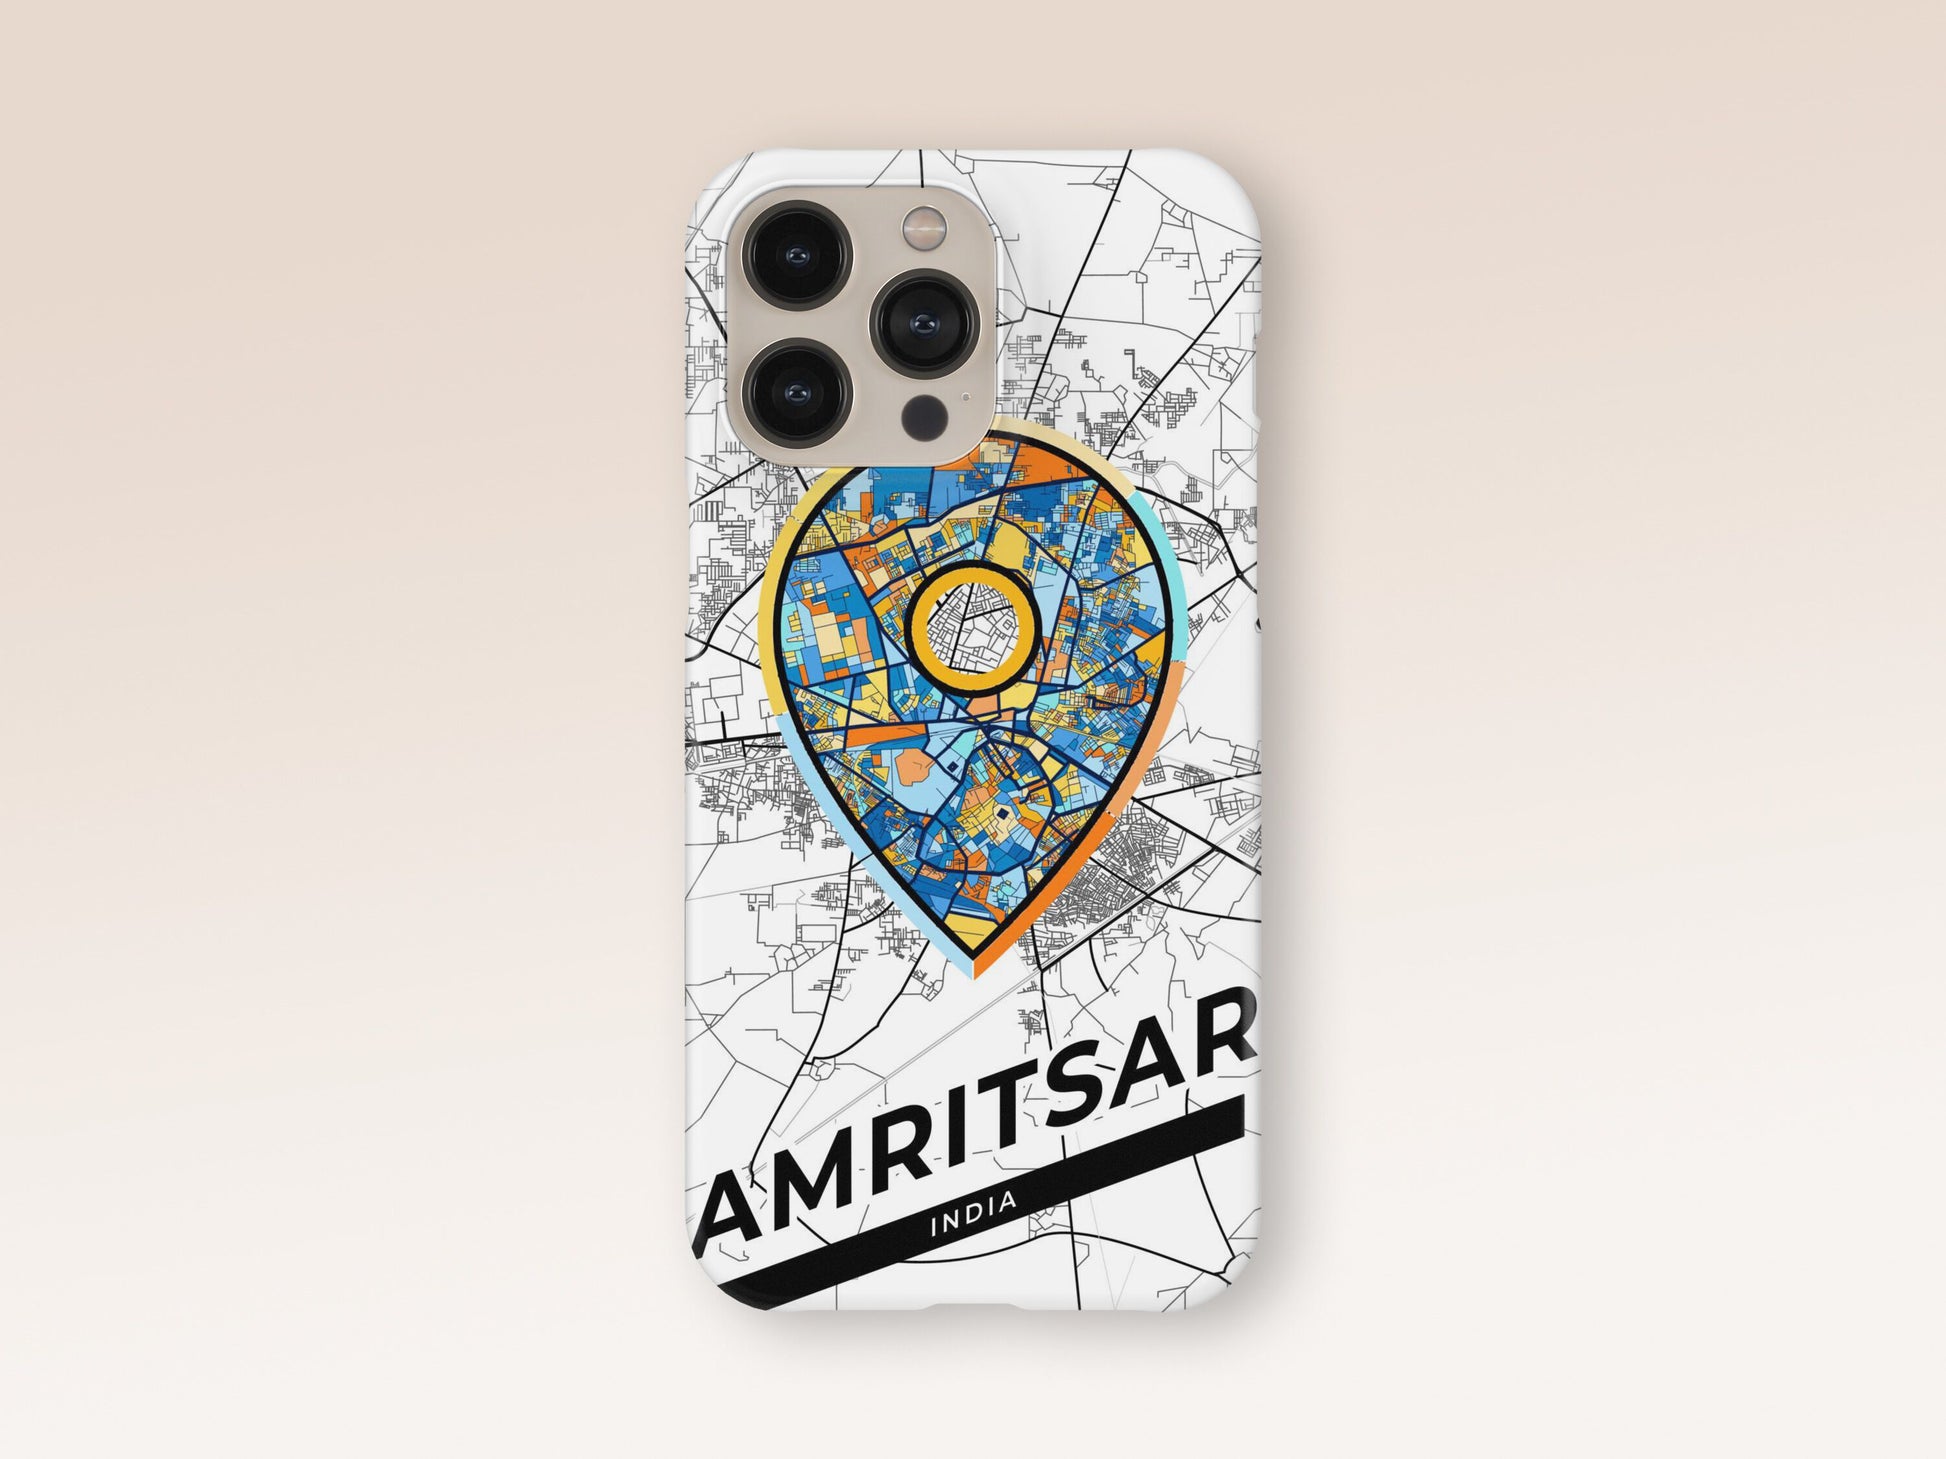 Amritsar India slim phone case with colorful icon. Birthday, wedding or housewarming gift. Couple match cases. 1